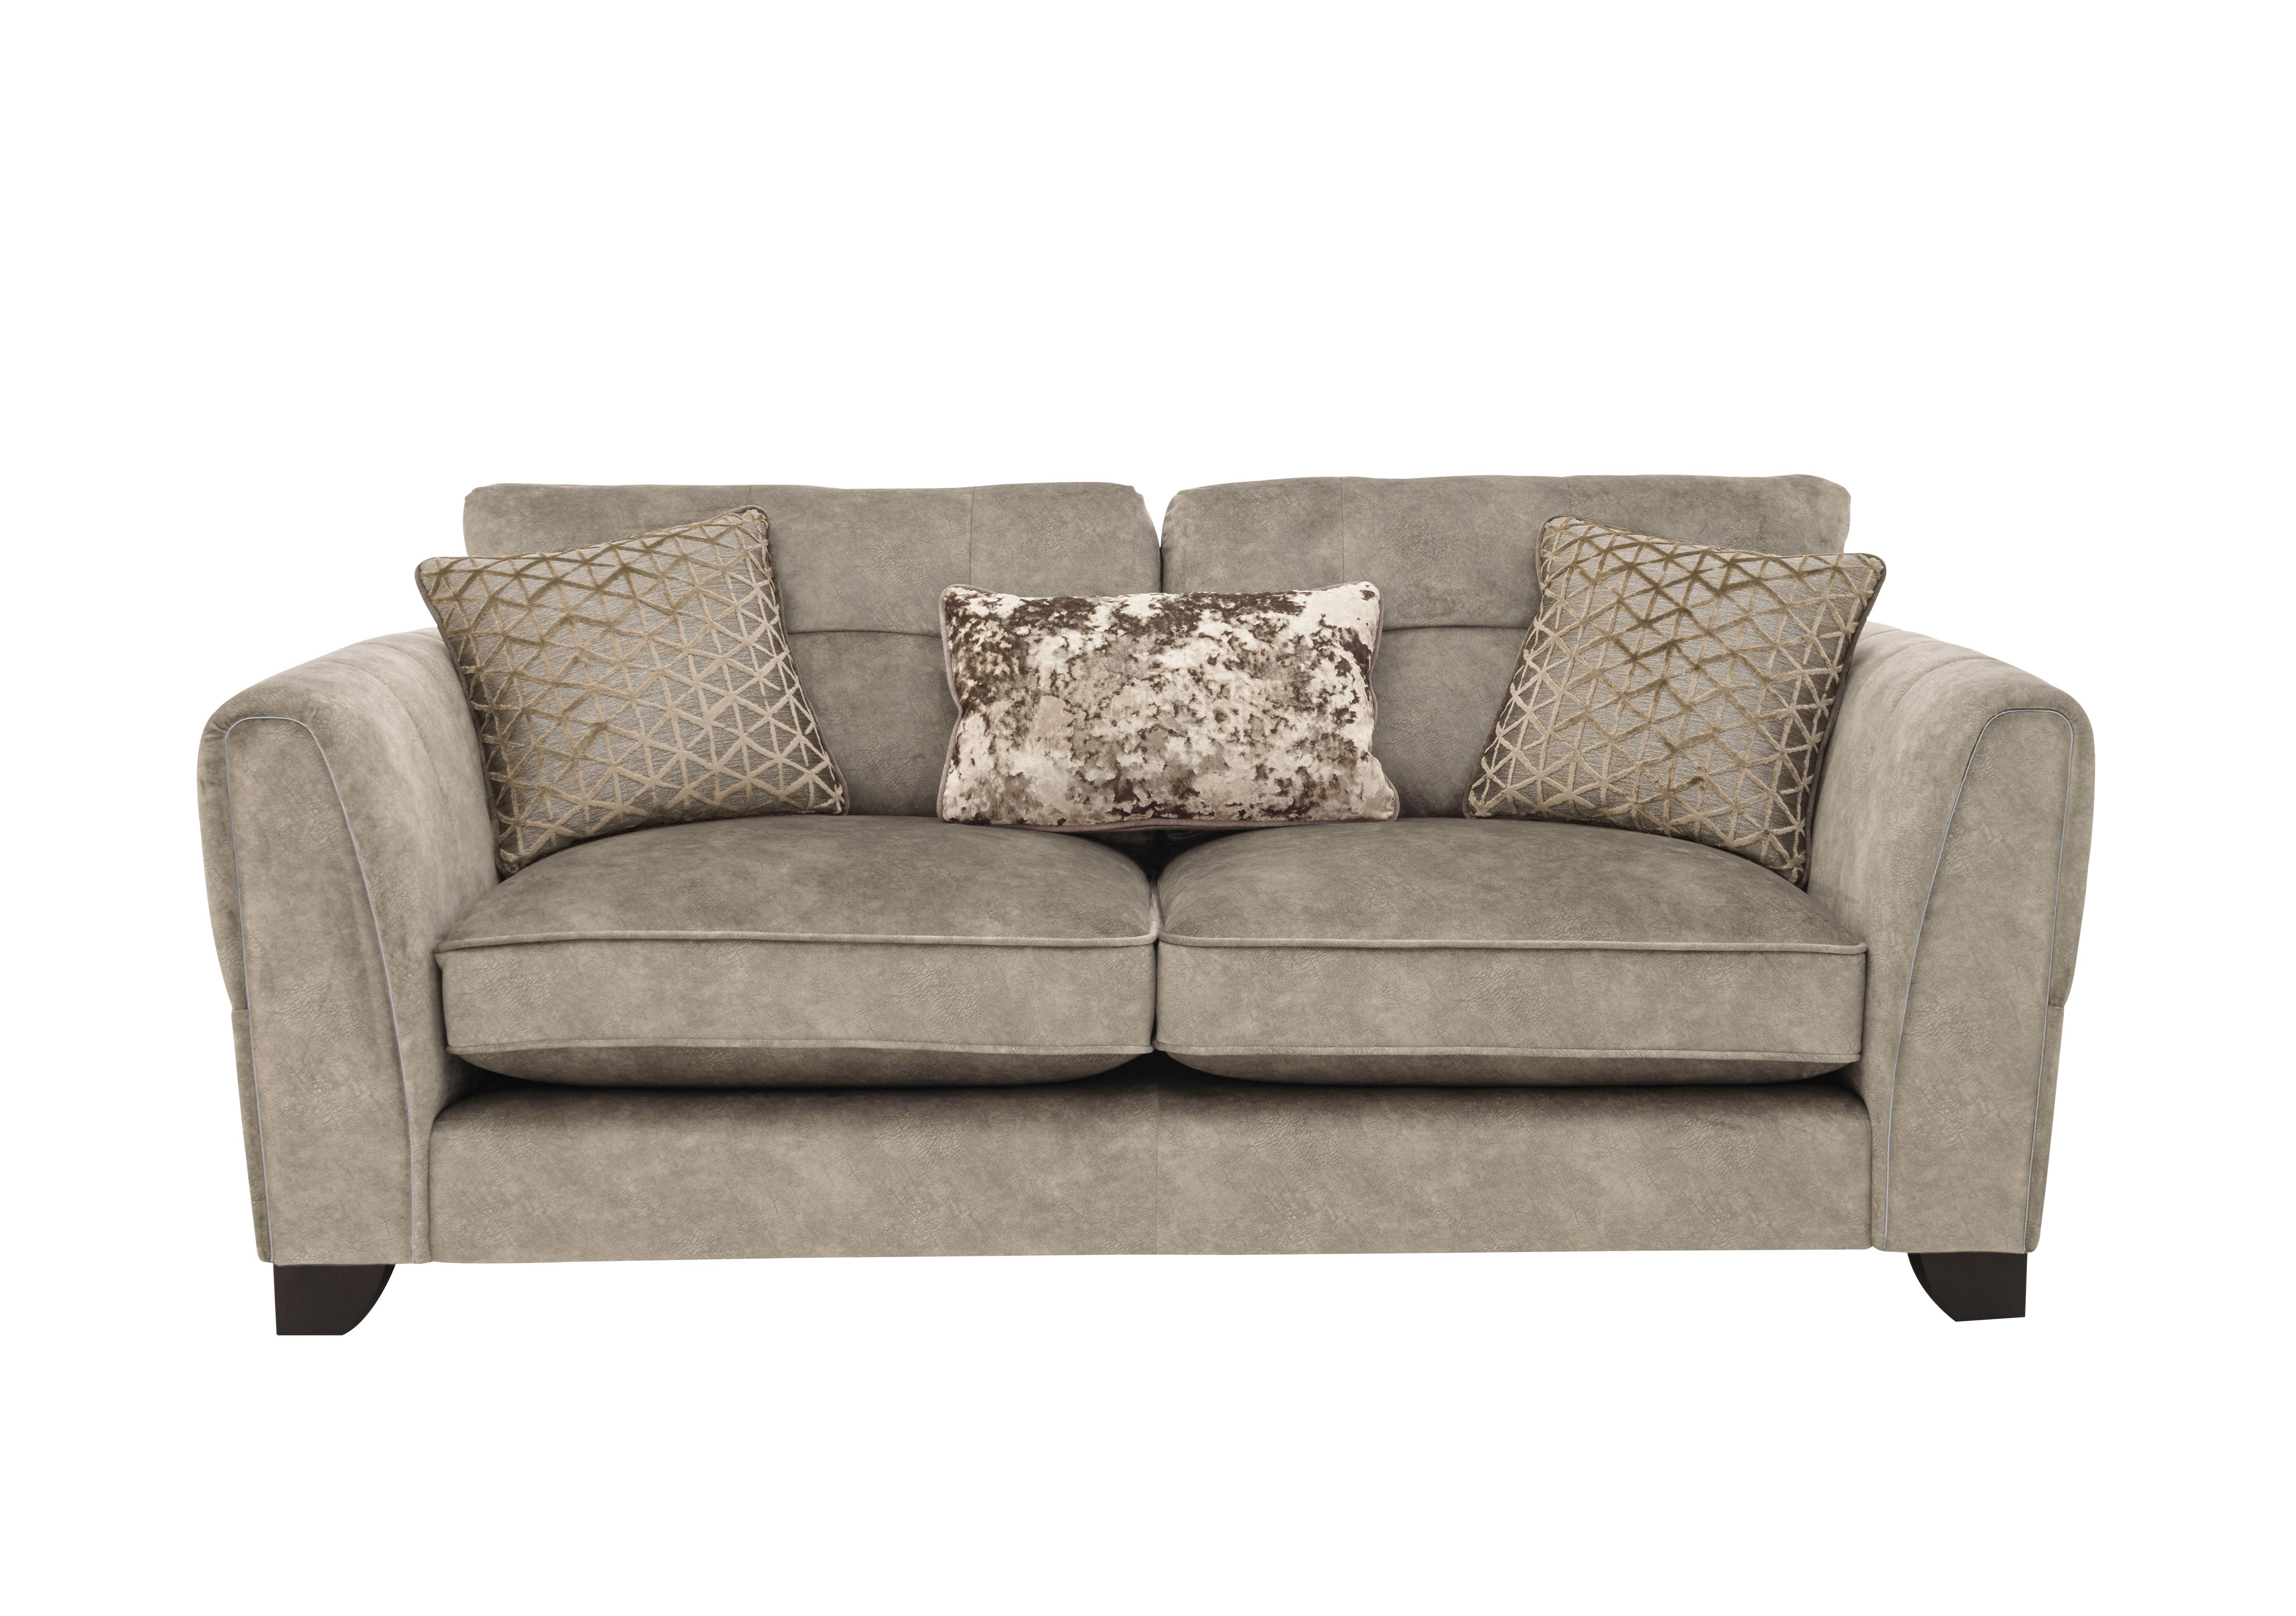 Ariana 3 Seater Fabric Classic Back Sofa in Dapple Oyster Chrome Insert on Furniture Village